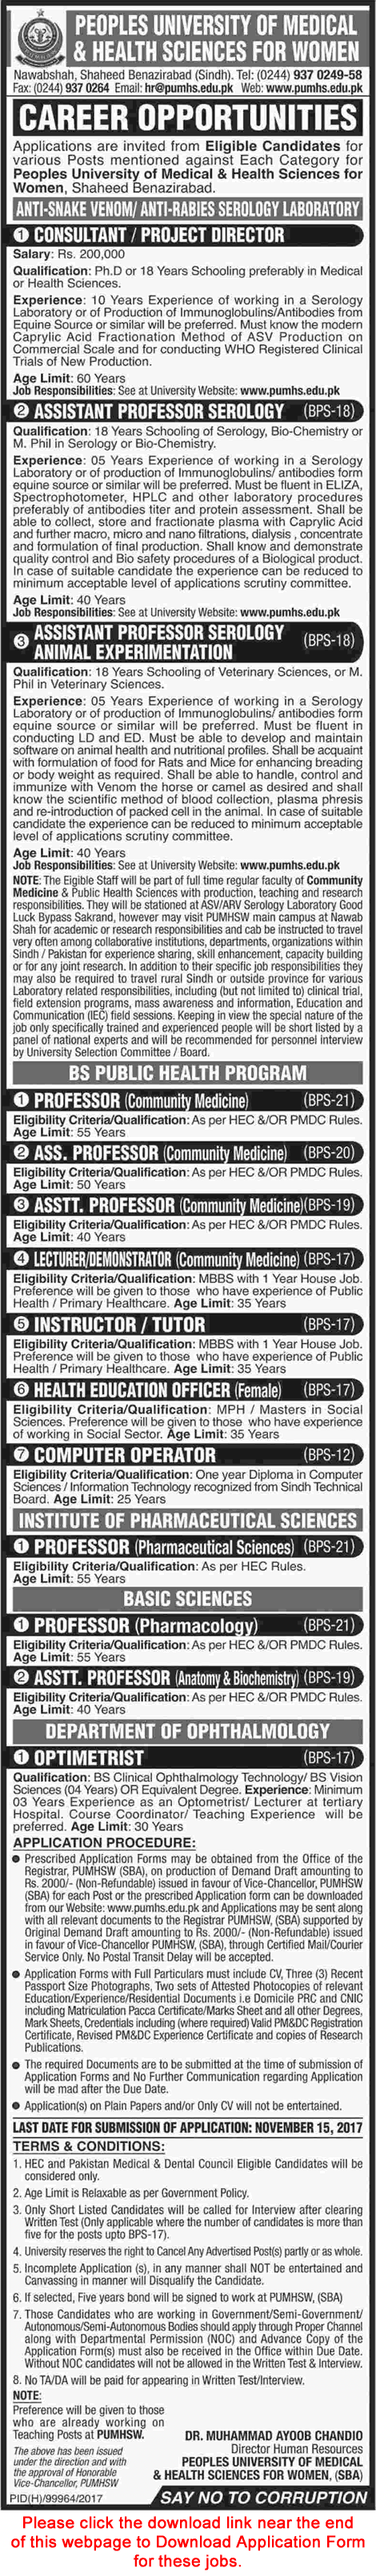 PUMHS Nawabshah Jobs 2017 October Application Form Peoples University of Medical and Health Sciences for Women Latest